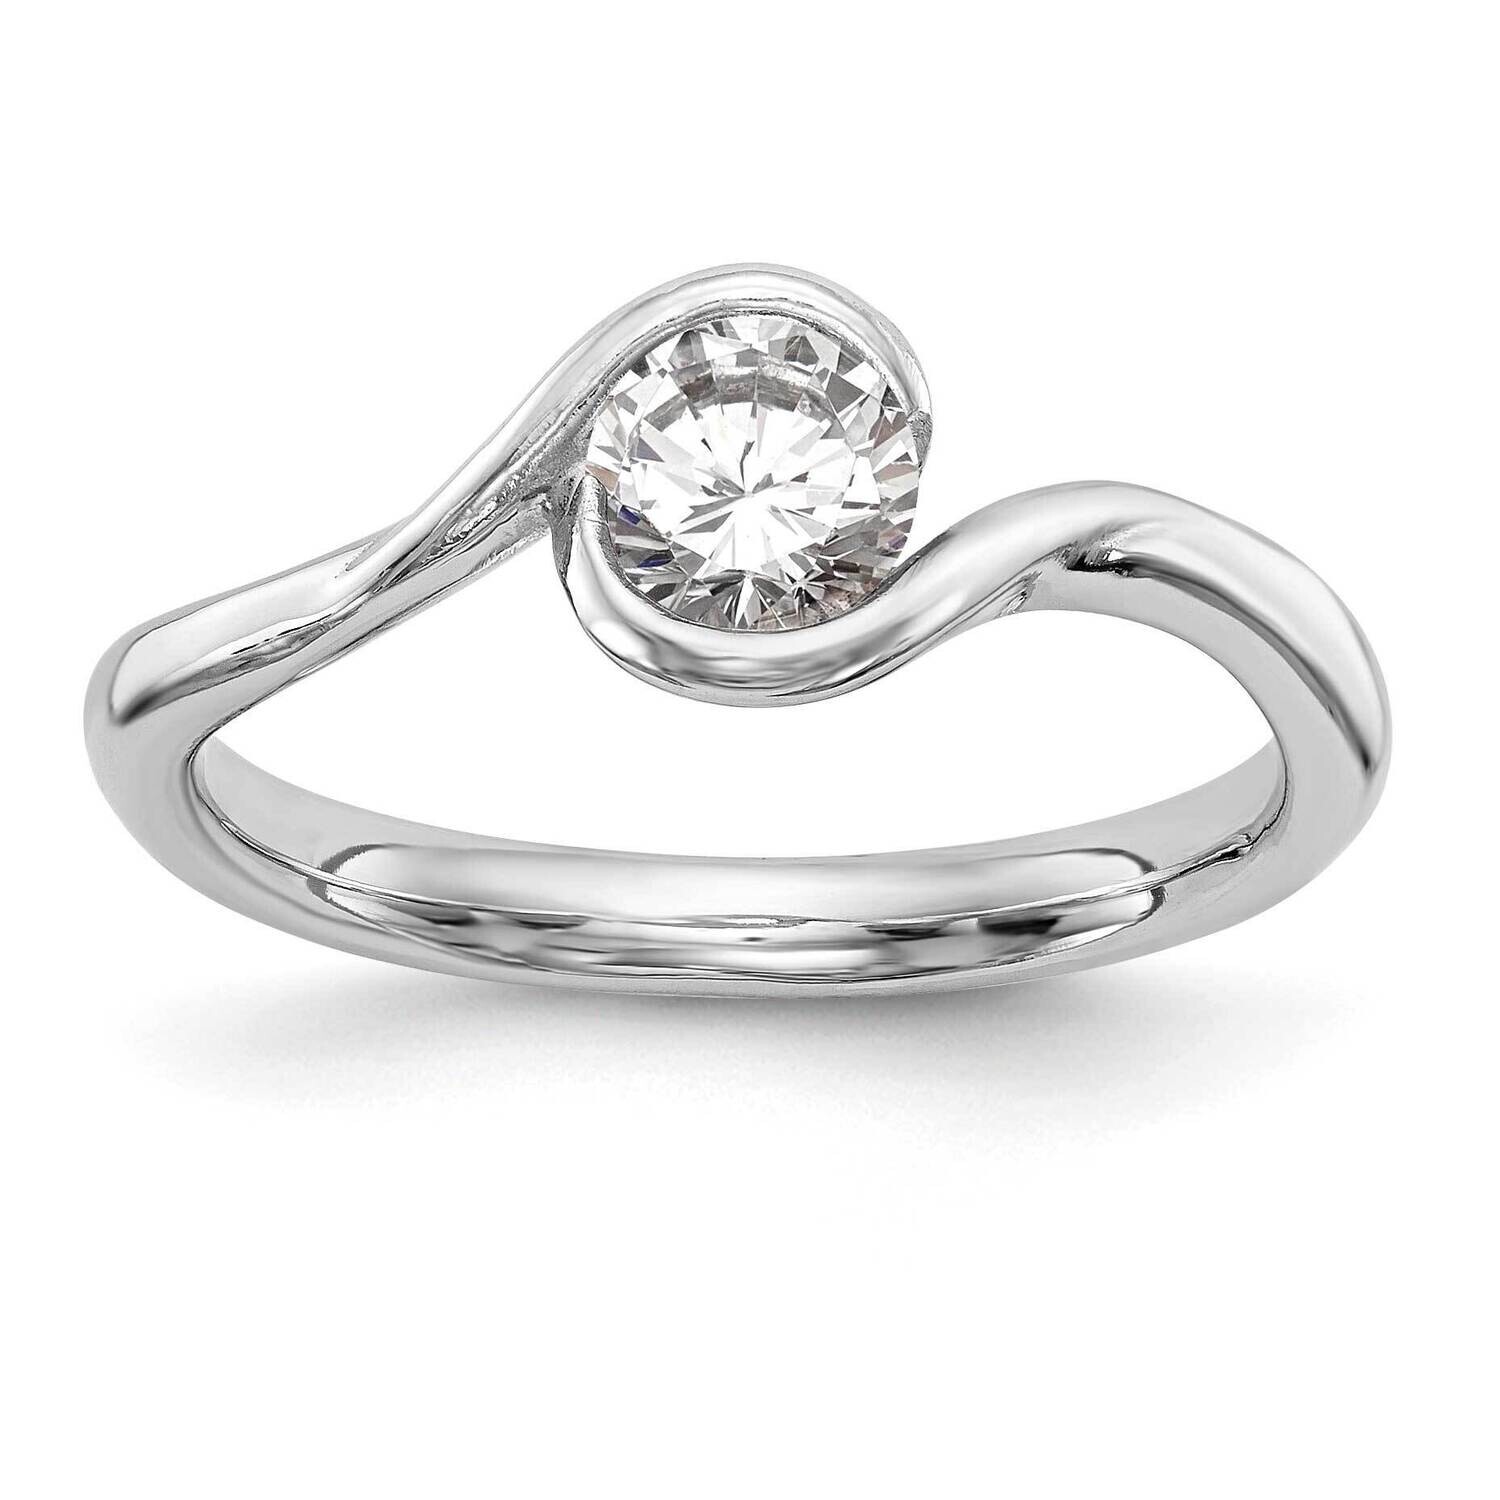 Holds 1/2 Carat 5.2mm Round Half-Bezel Bypass Solitaire Engagement Ring Mounting 14k White Gold RM2018E-5.0MM-CWAA